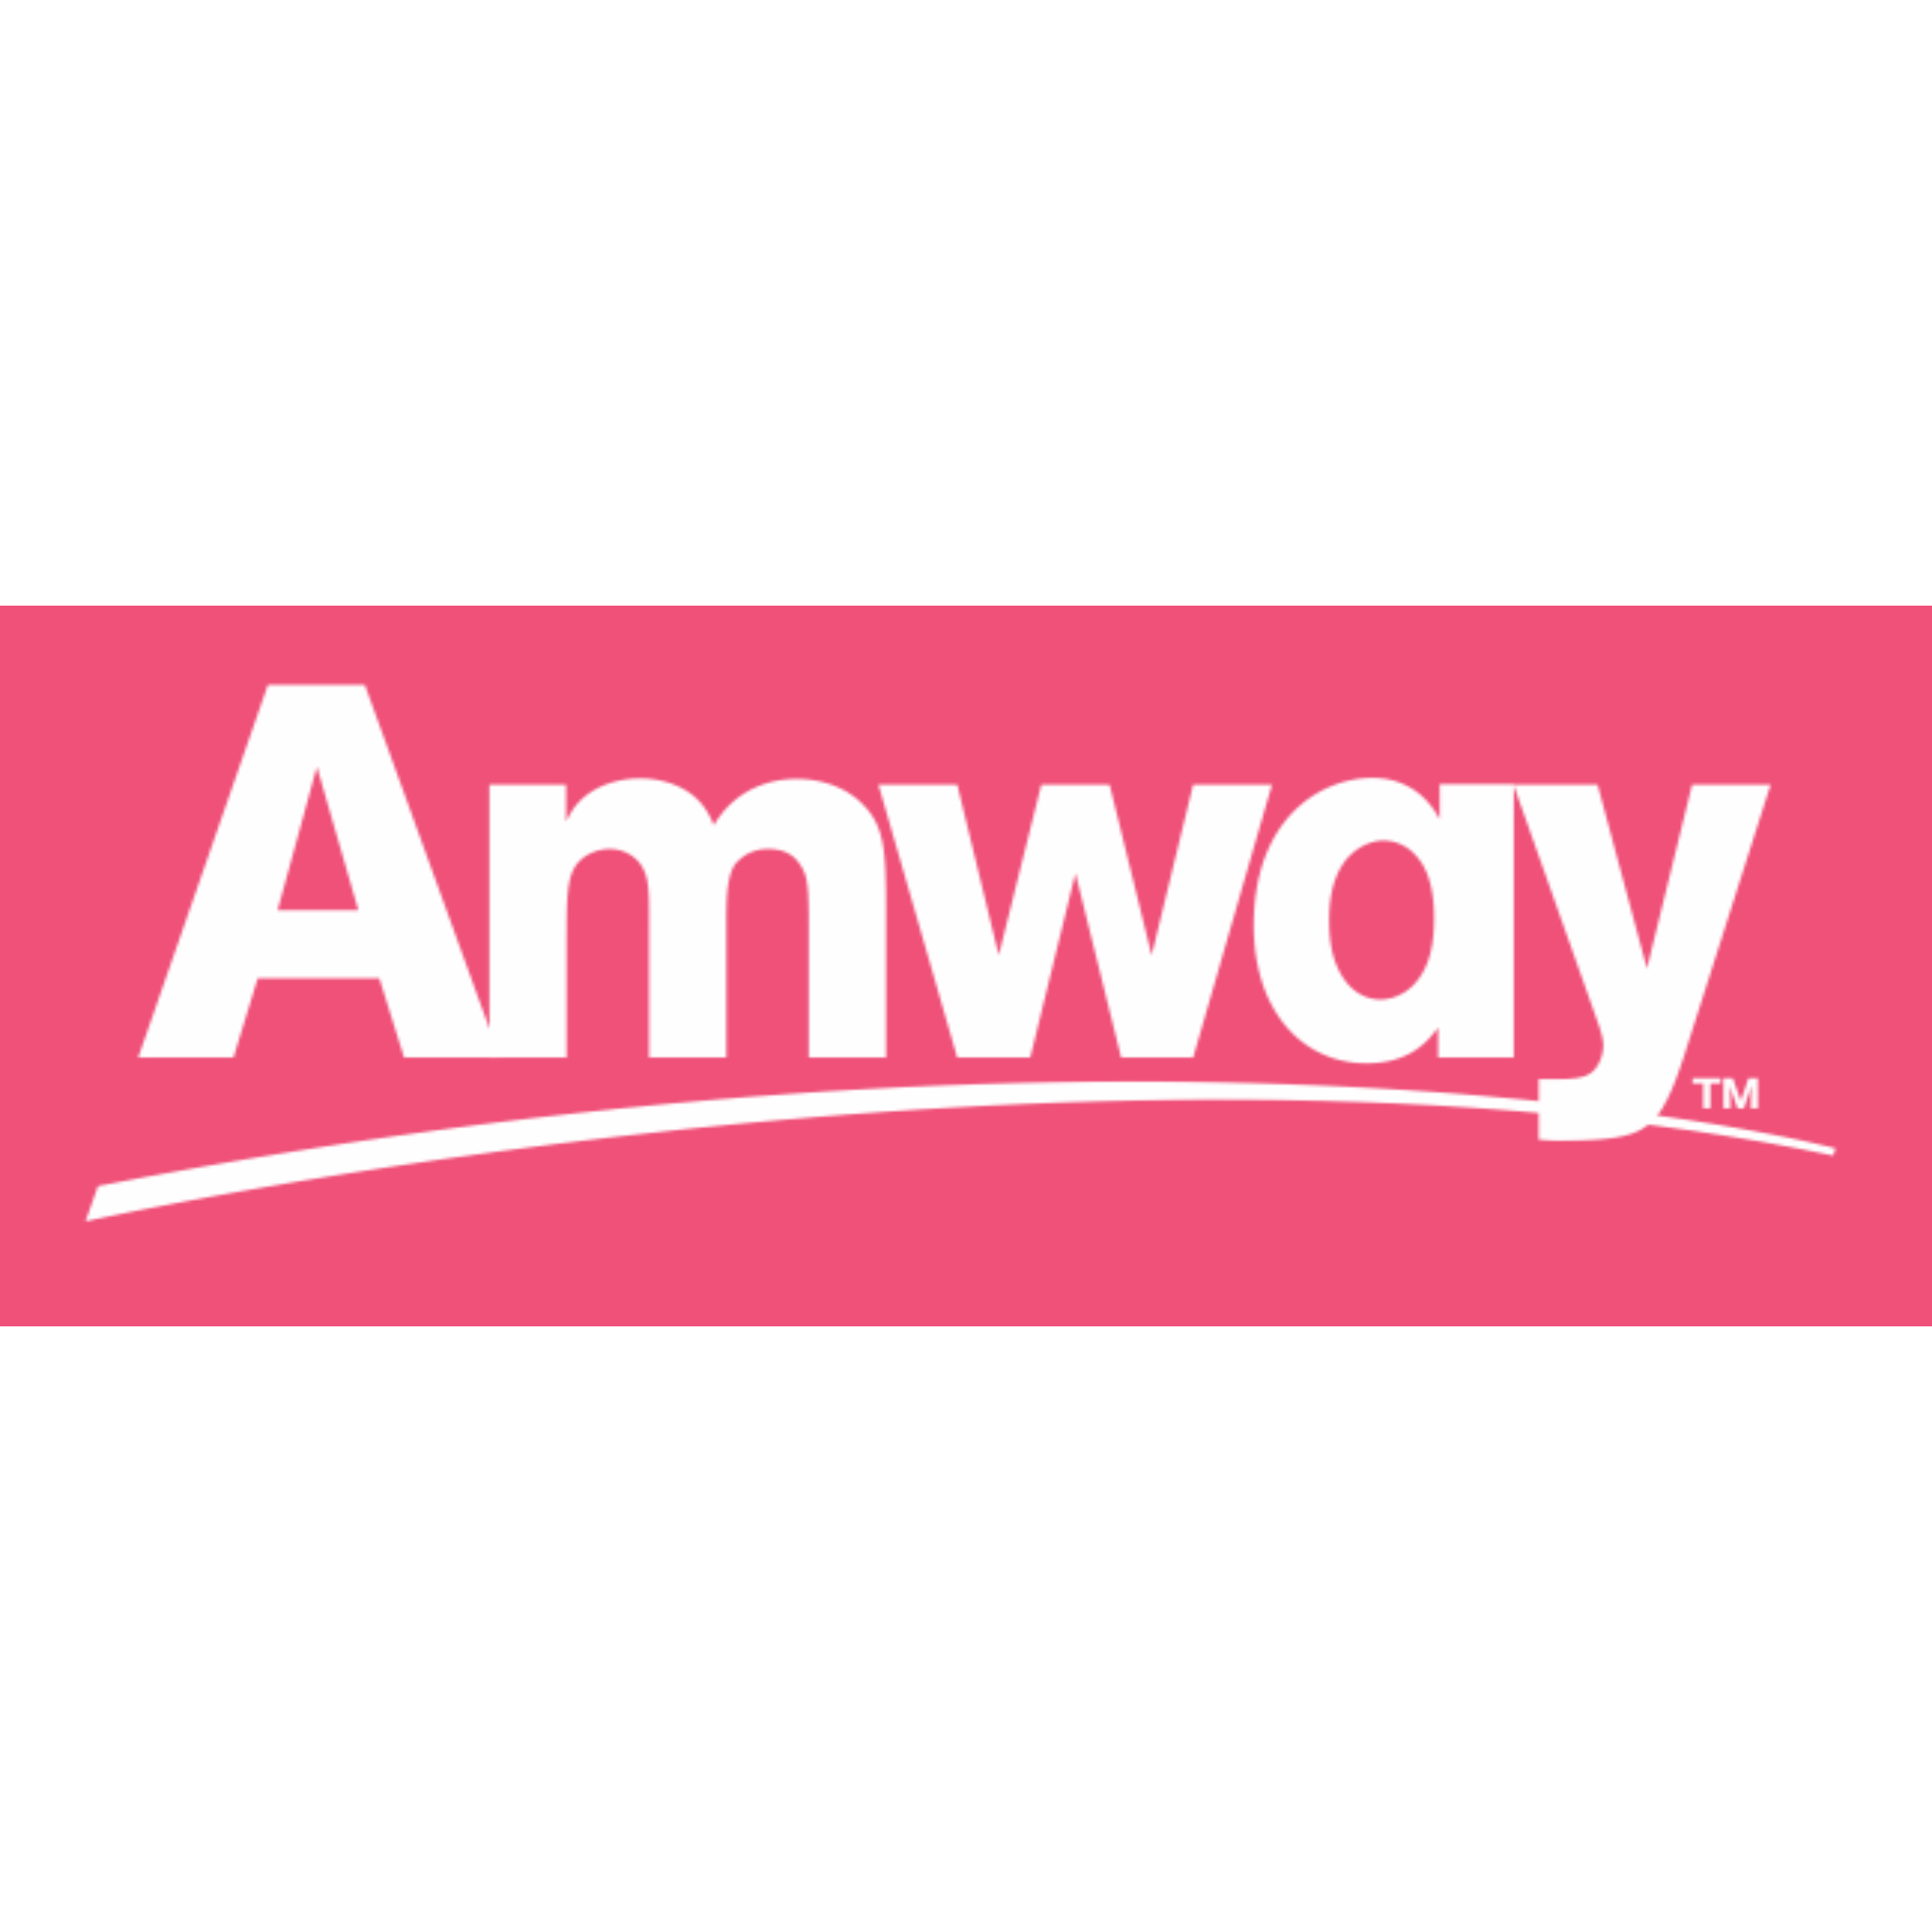 According to an ED prosecution charge filed under the PMLA, Amway India made Rs 4,050 cr through fraud.-thumnail